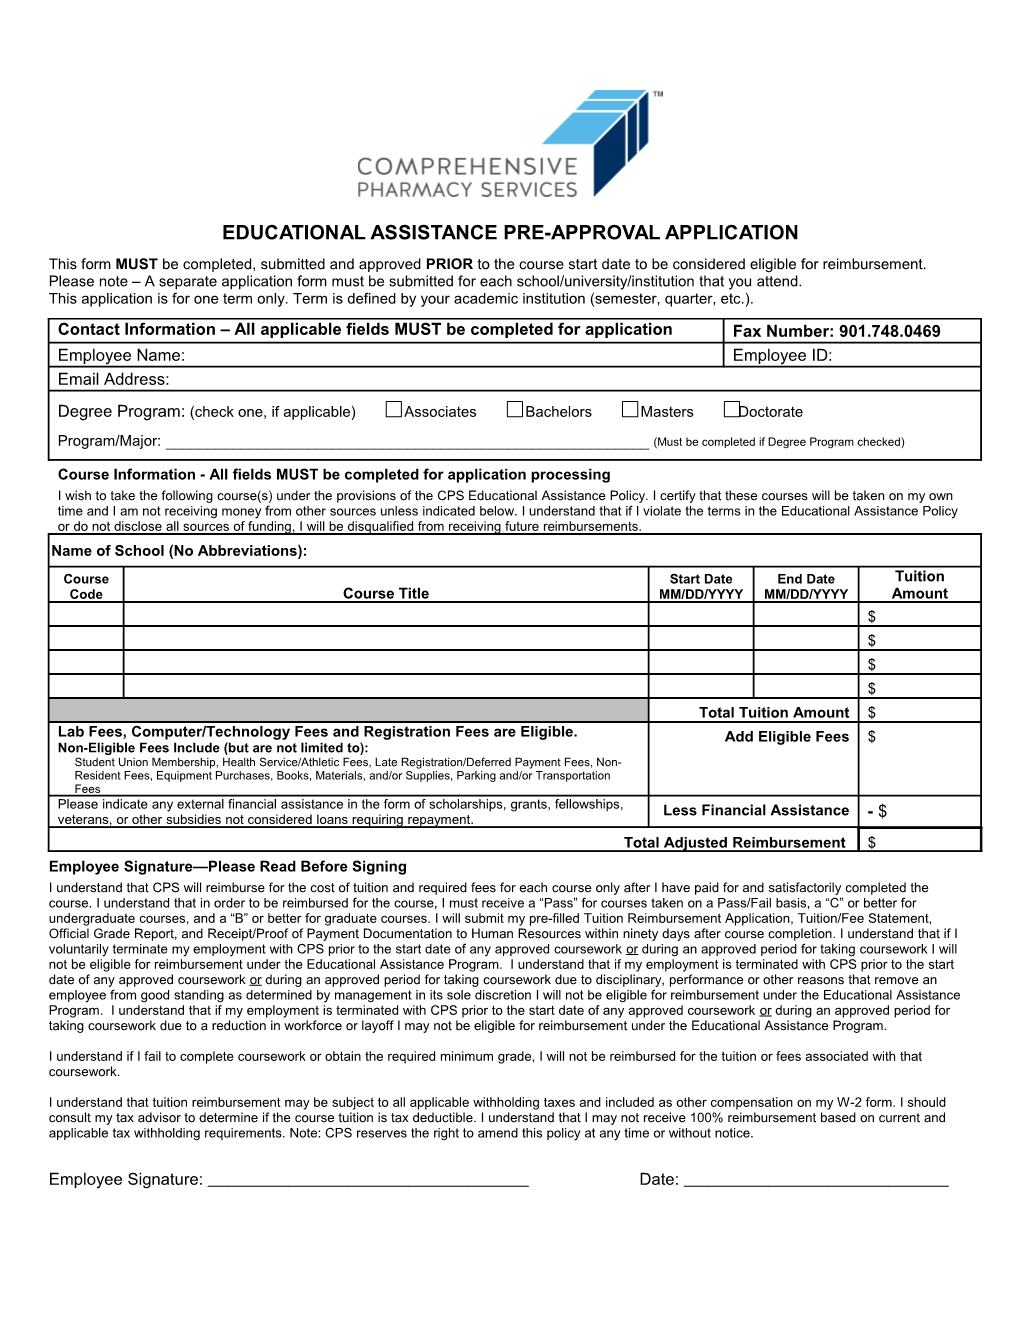 Educational Assistance Pre-Approval Application